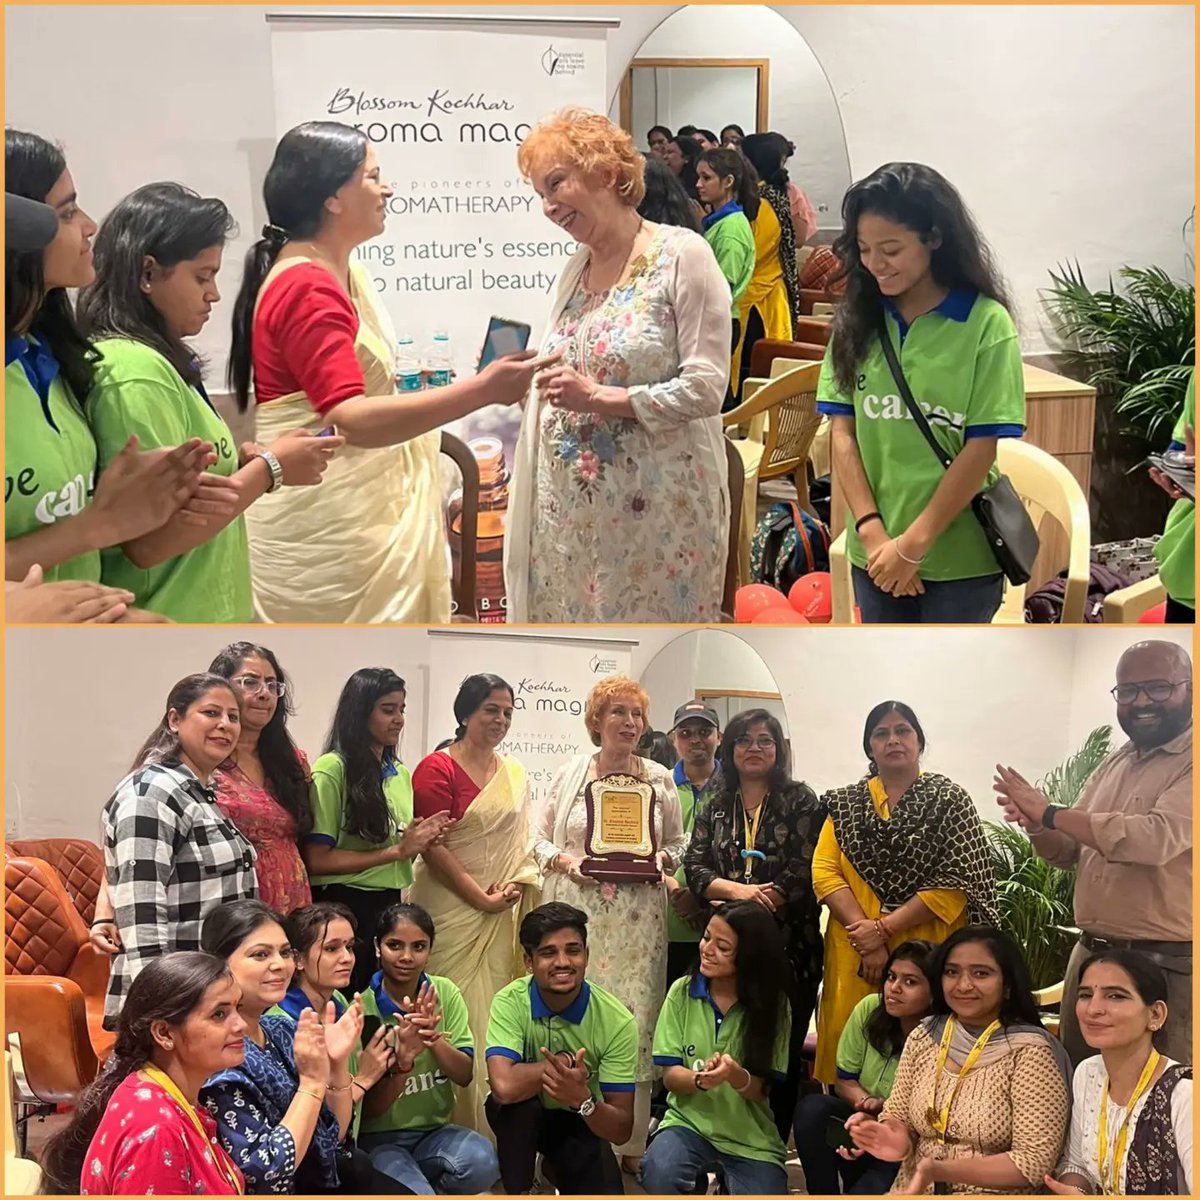 Delighted to partner w/ @blossomkochhar @AromaMagicIndia on #NationalCancerSurvivorsDay to introduce a Basic #Cosmetology Course for #Cancer #survivors & parents aiming to boost self-confidence, provide essential #beauty & #wellness skills to #empower them to reclaim their lives